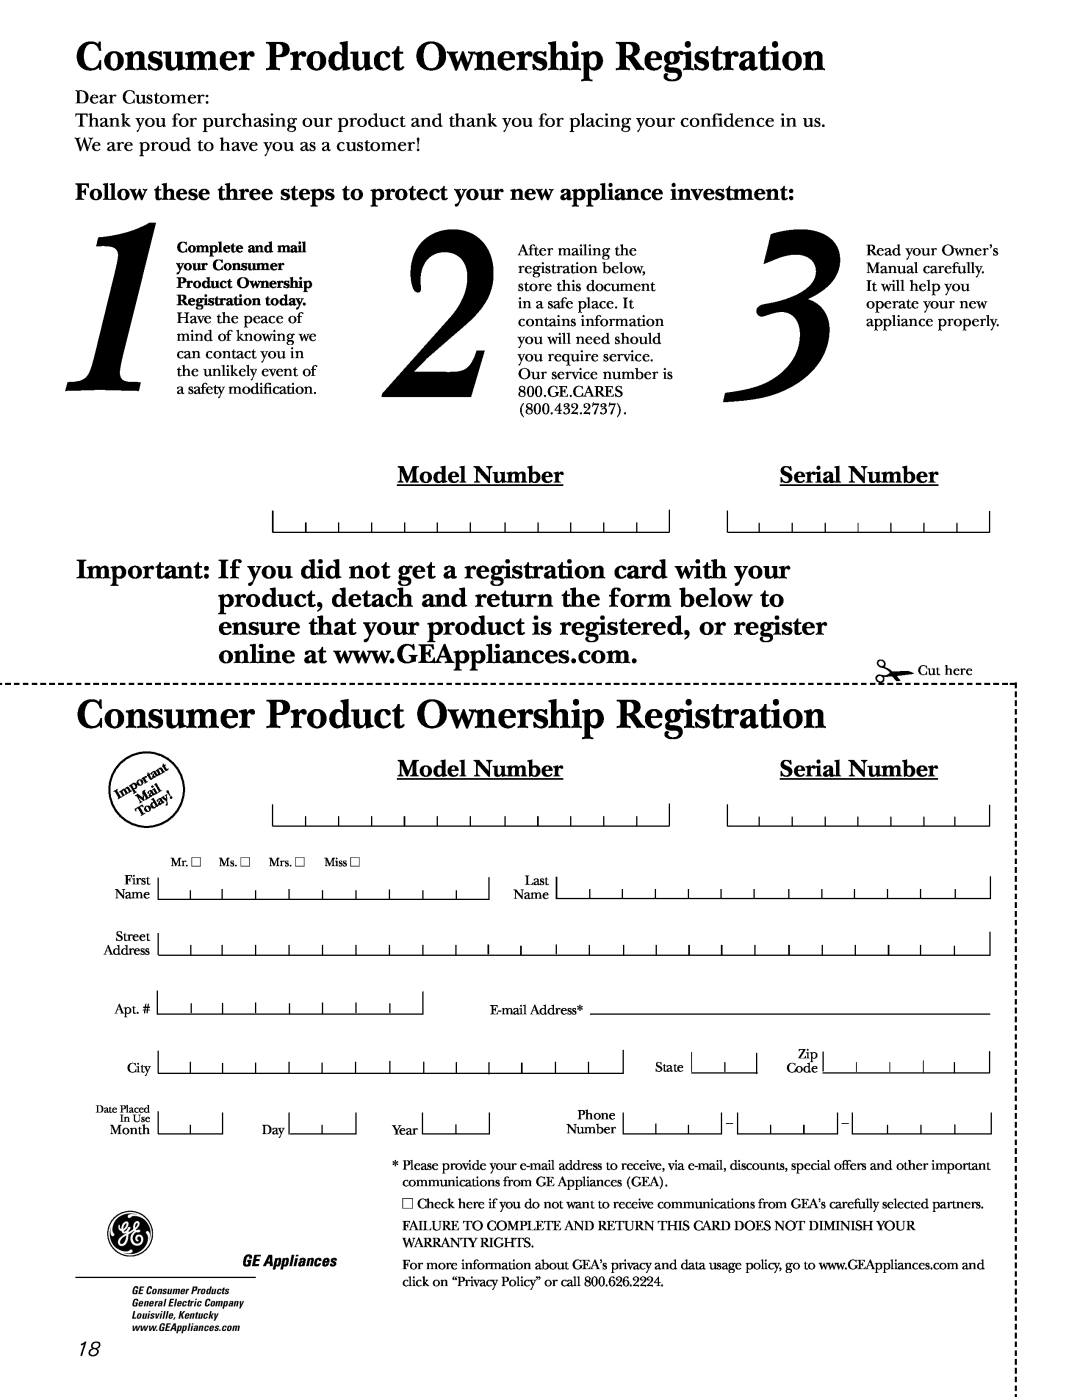 GE AGE12 Model Number, Serial Number, Consumer Product Ownership Registration, Complete and mail, your Consumer 